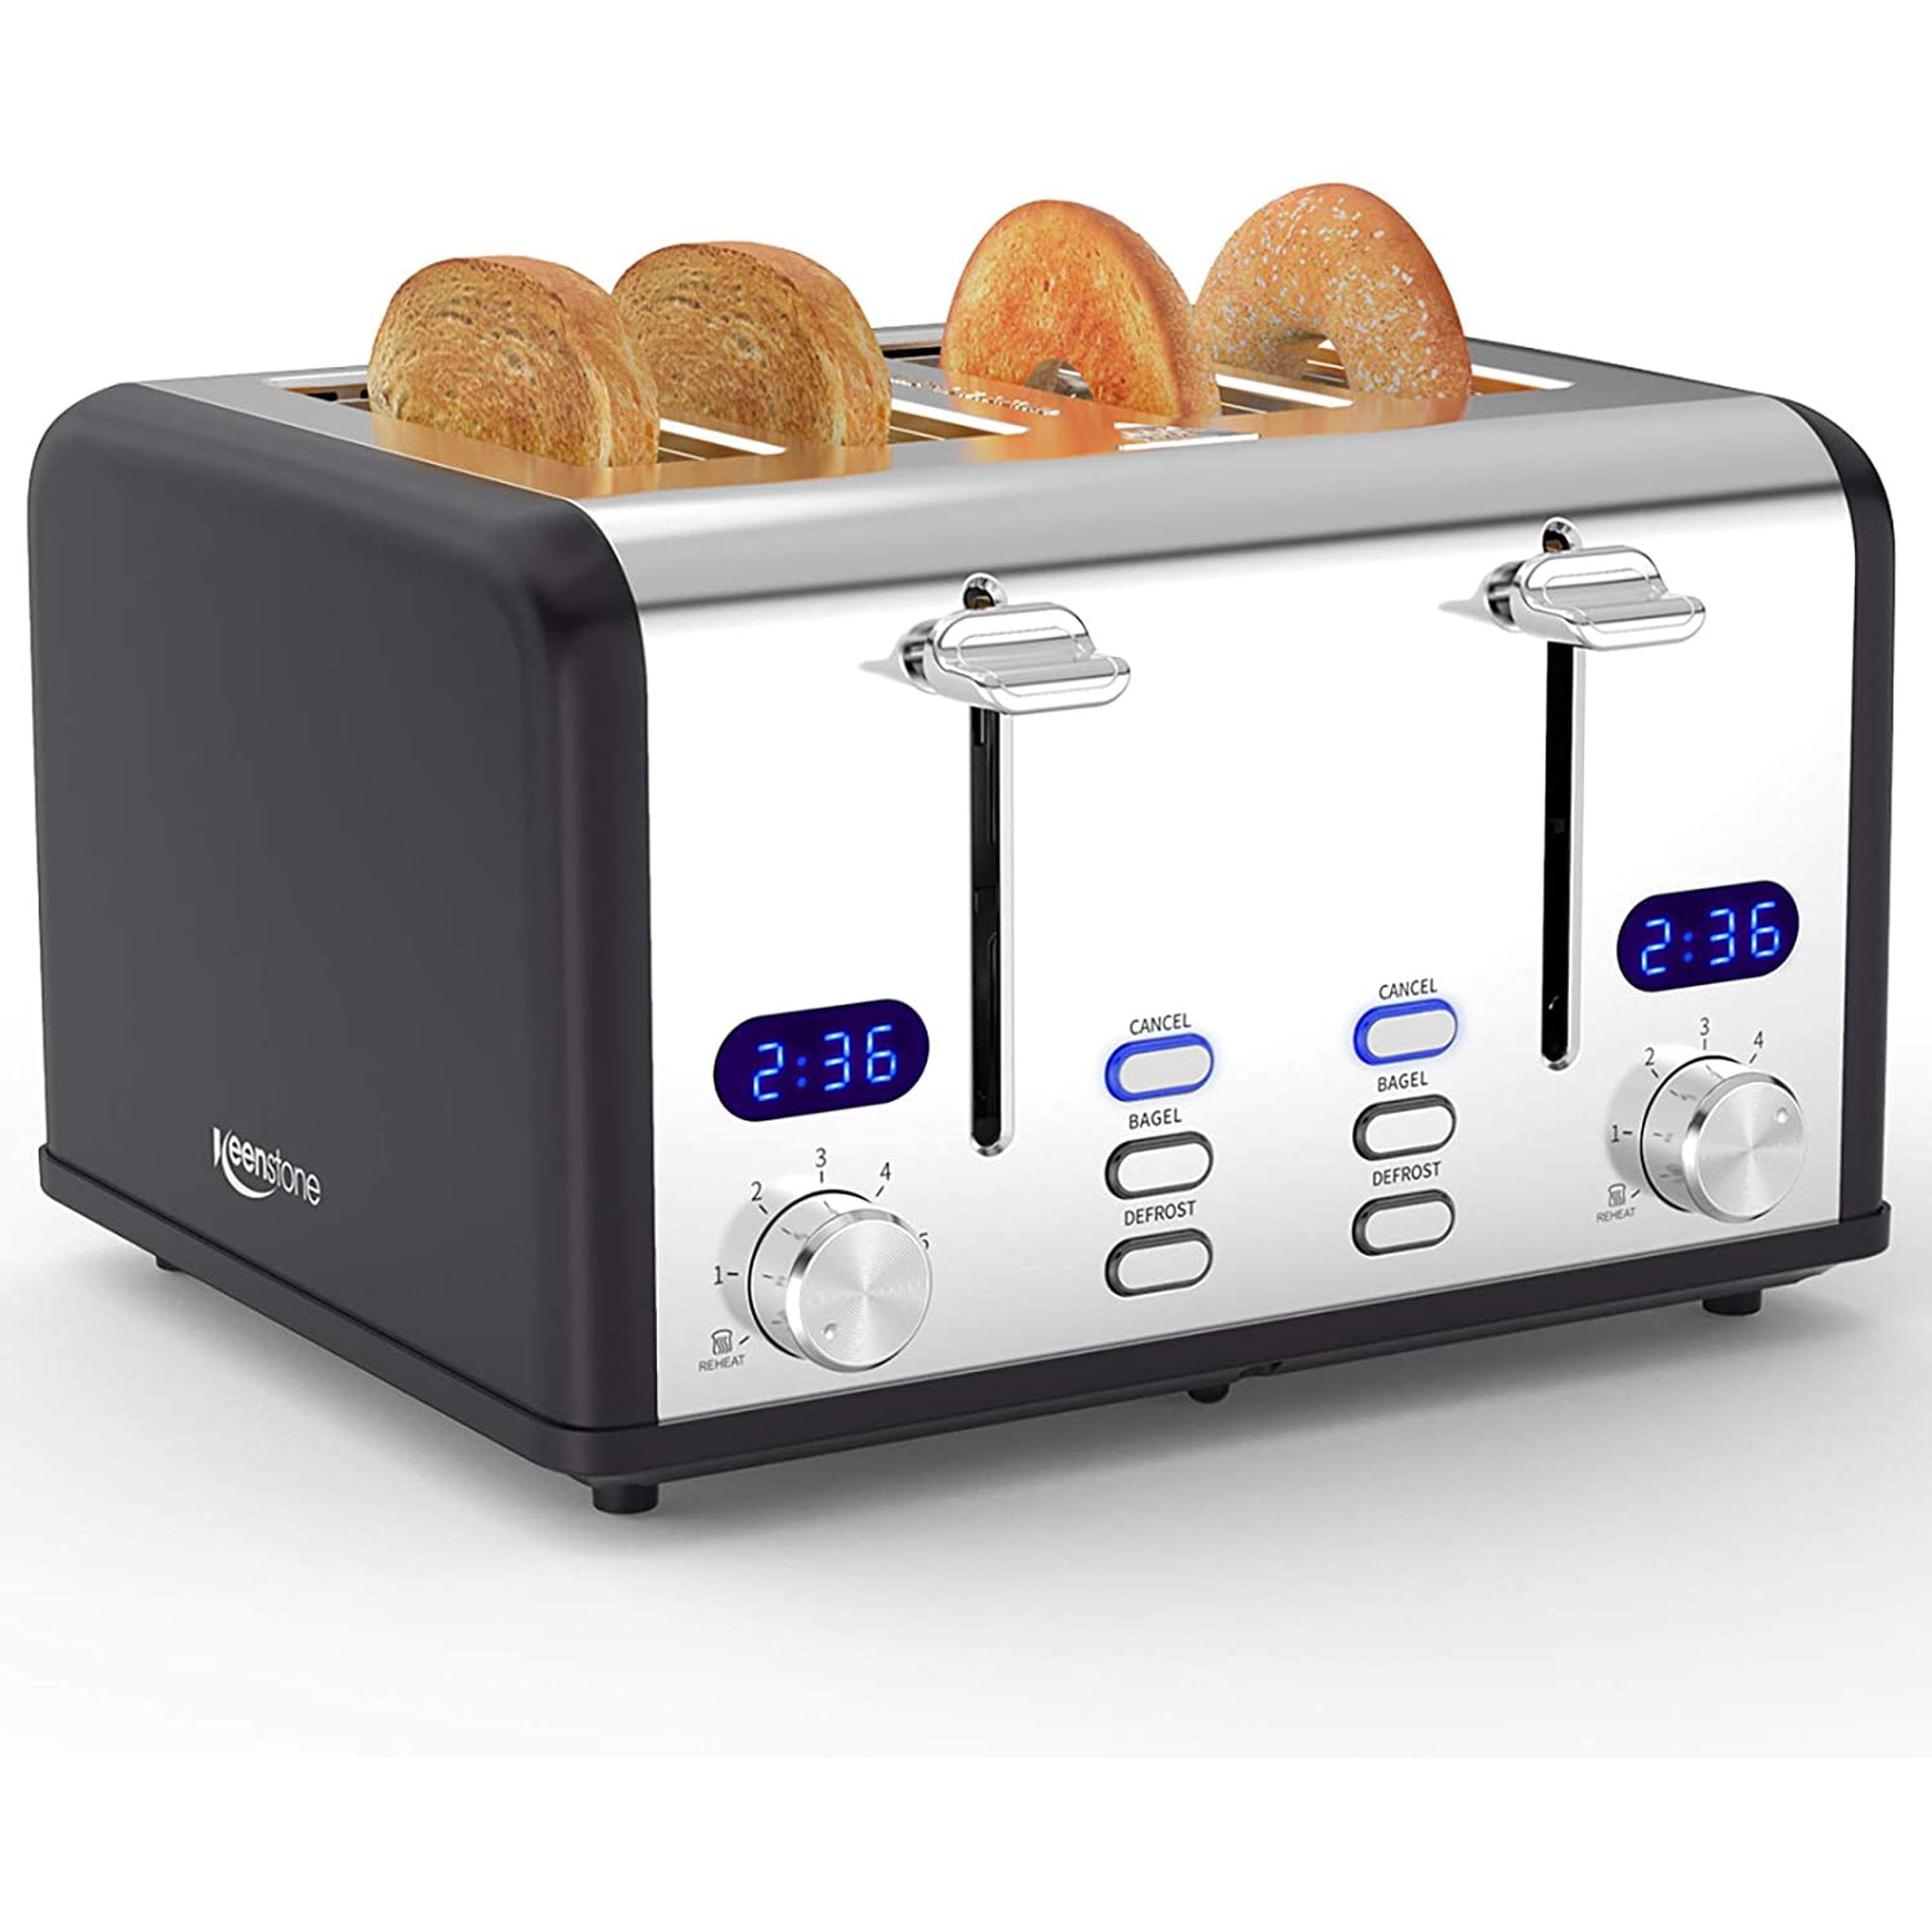 Toaster 2 Slice Toasters Best Rated Prime Extra Wide Slot Toaster with 7 Bread Shade Settings Bagel Cancel Defrost Function Removable Crumb Tray Stainless Steel Toaster Blue 